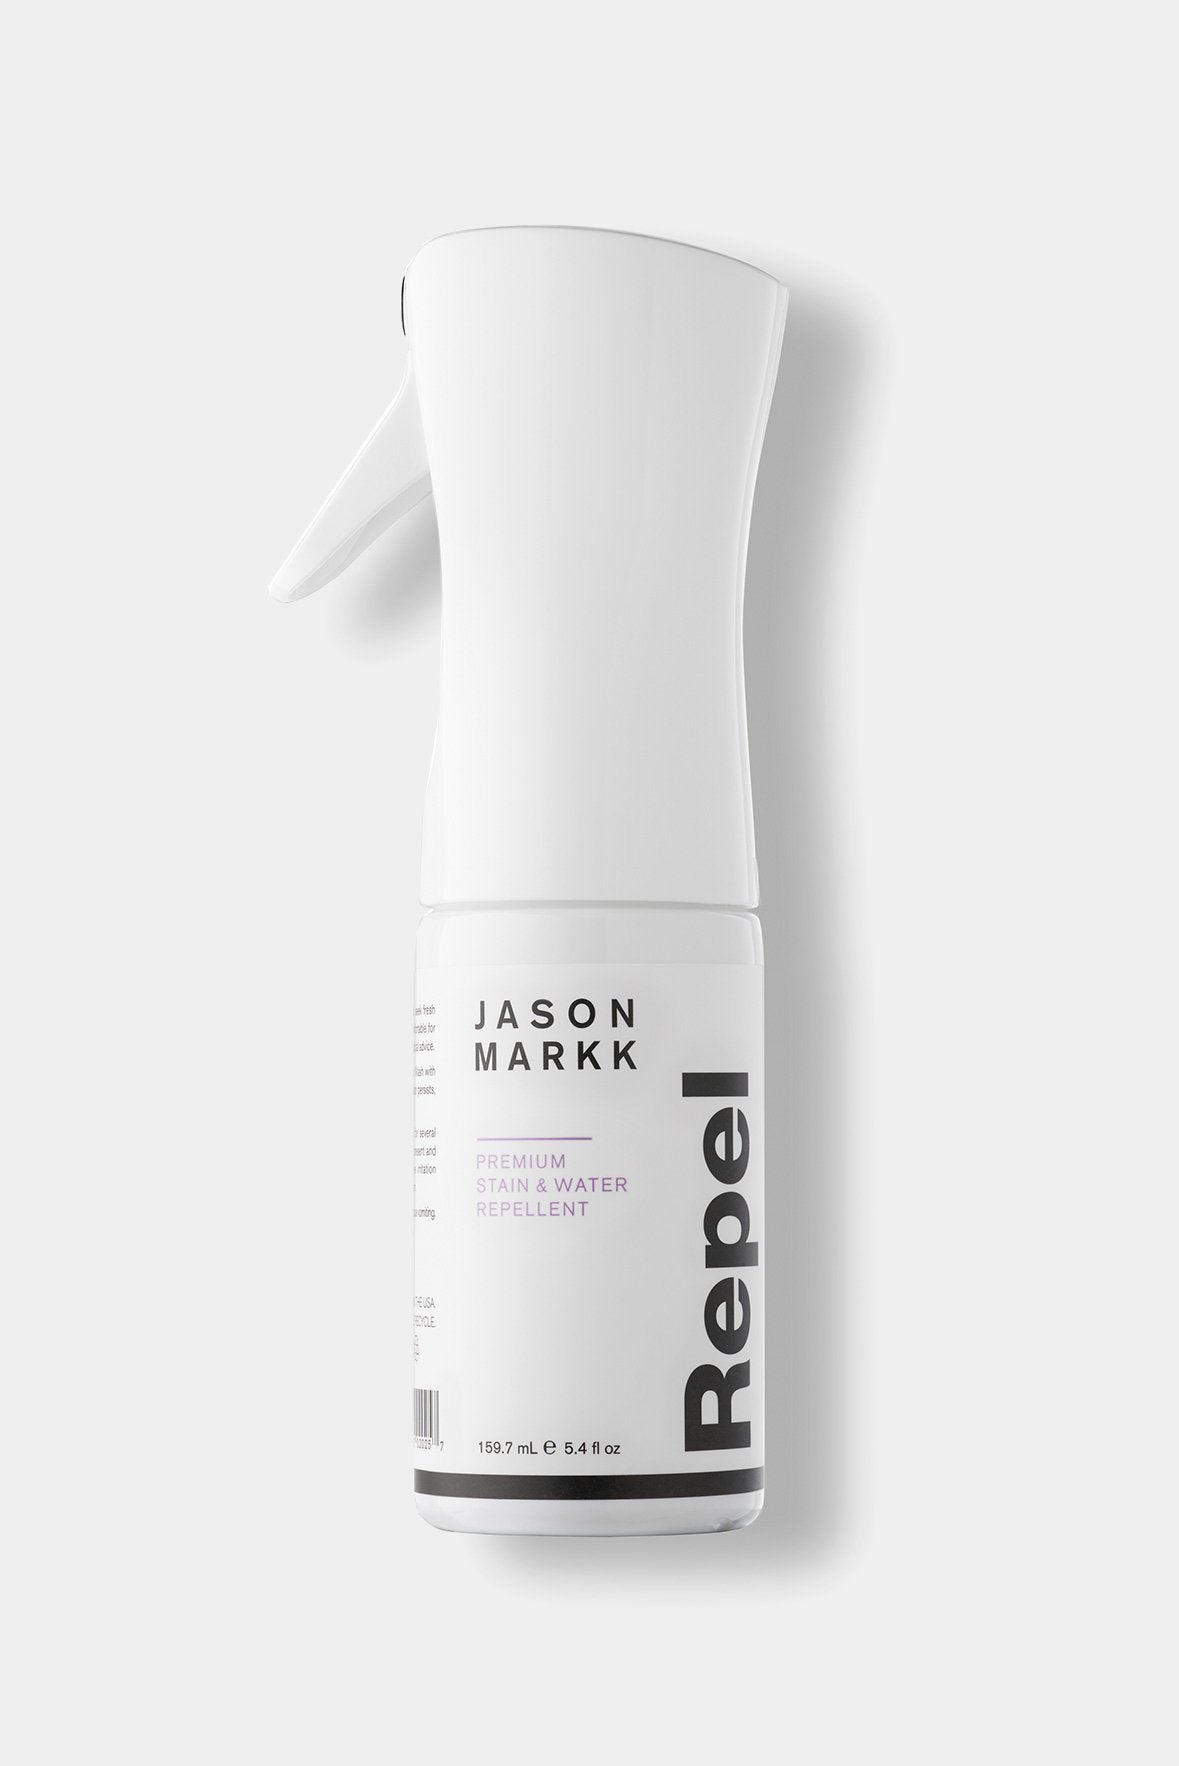 Jason Markk 5.4 oz Repel Spray. Transparent water and stain protective barrier.